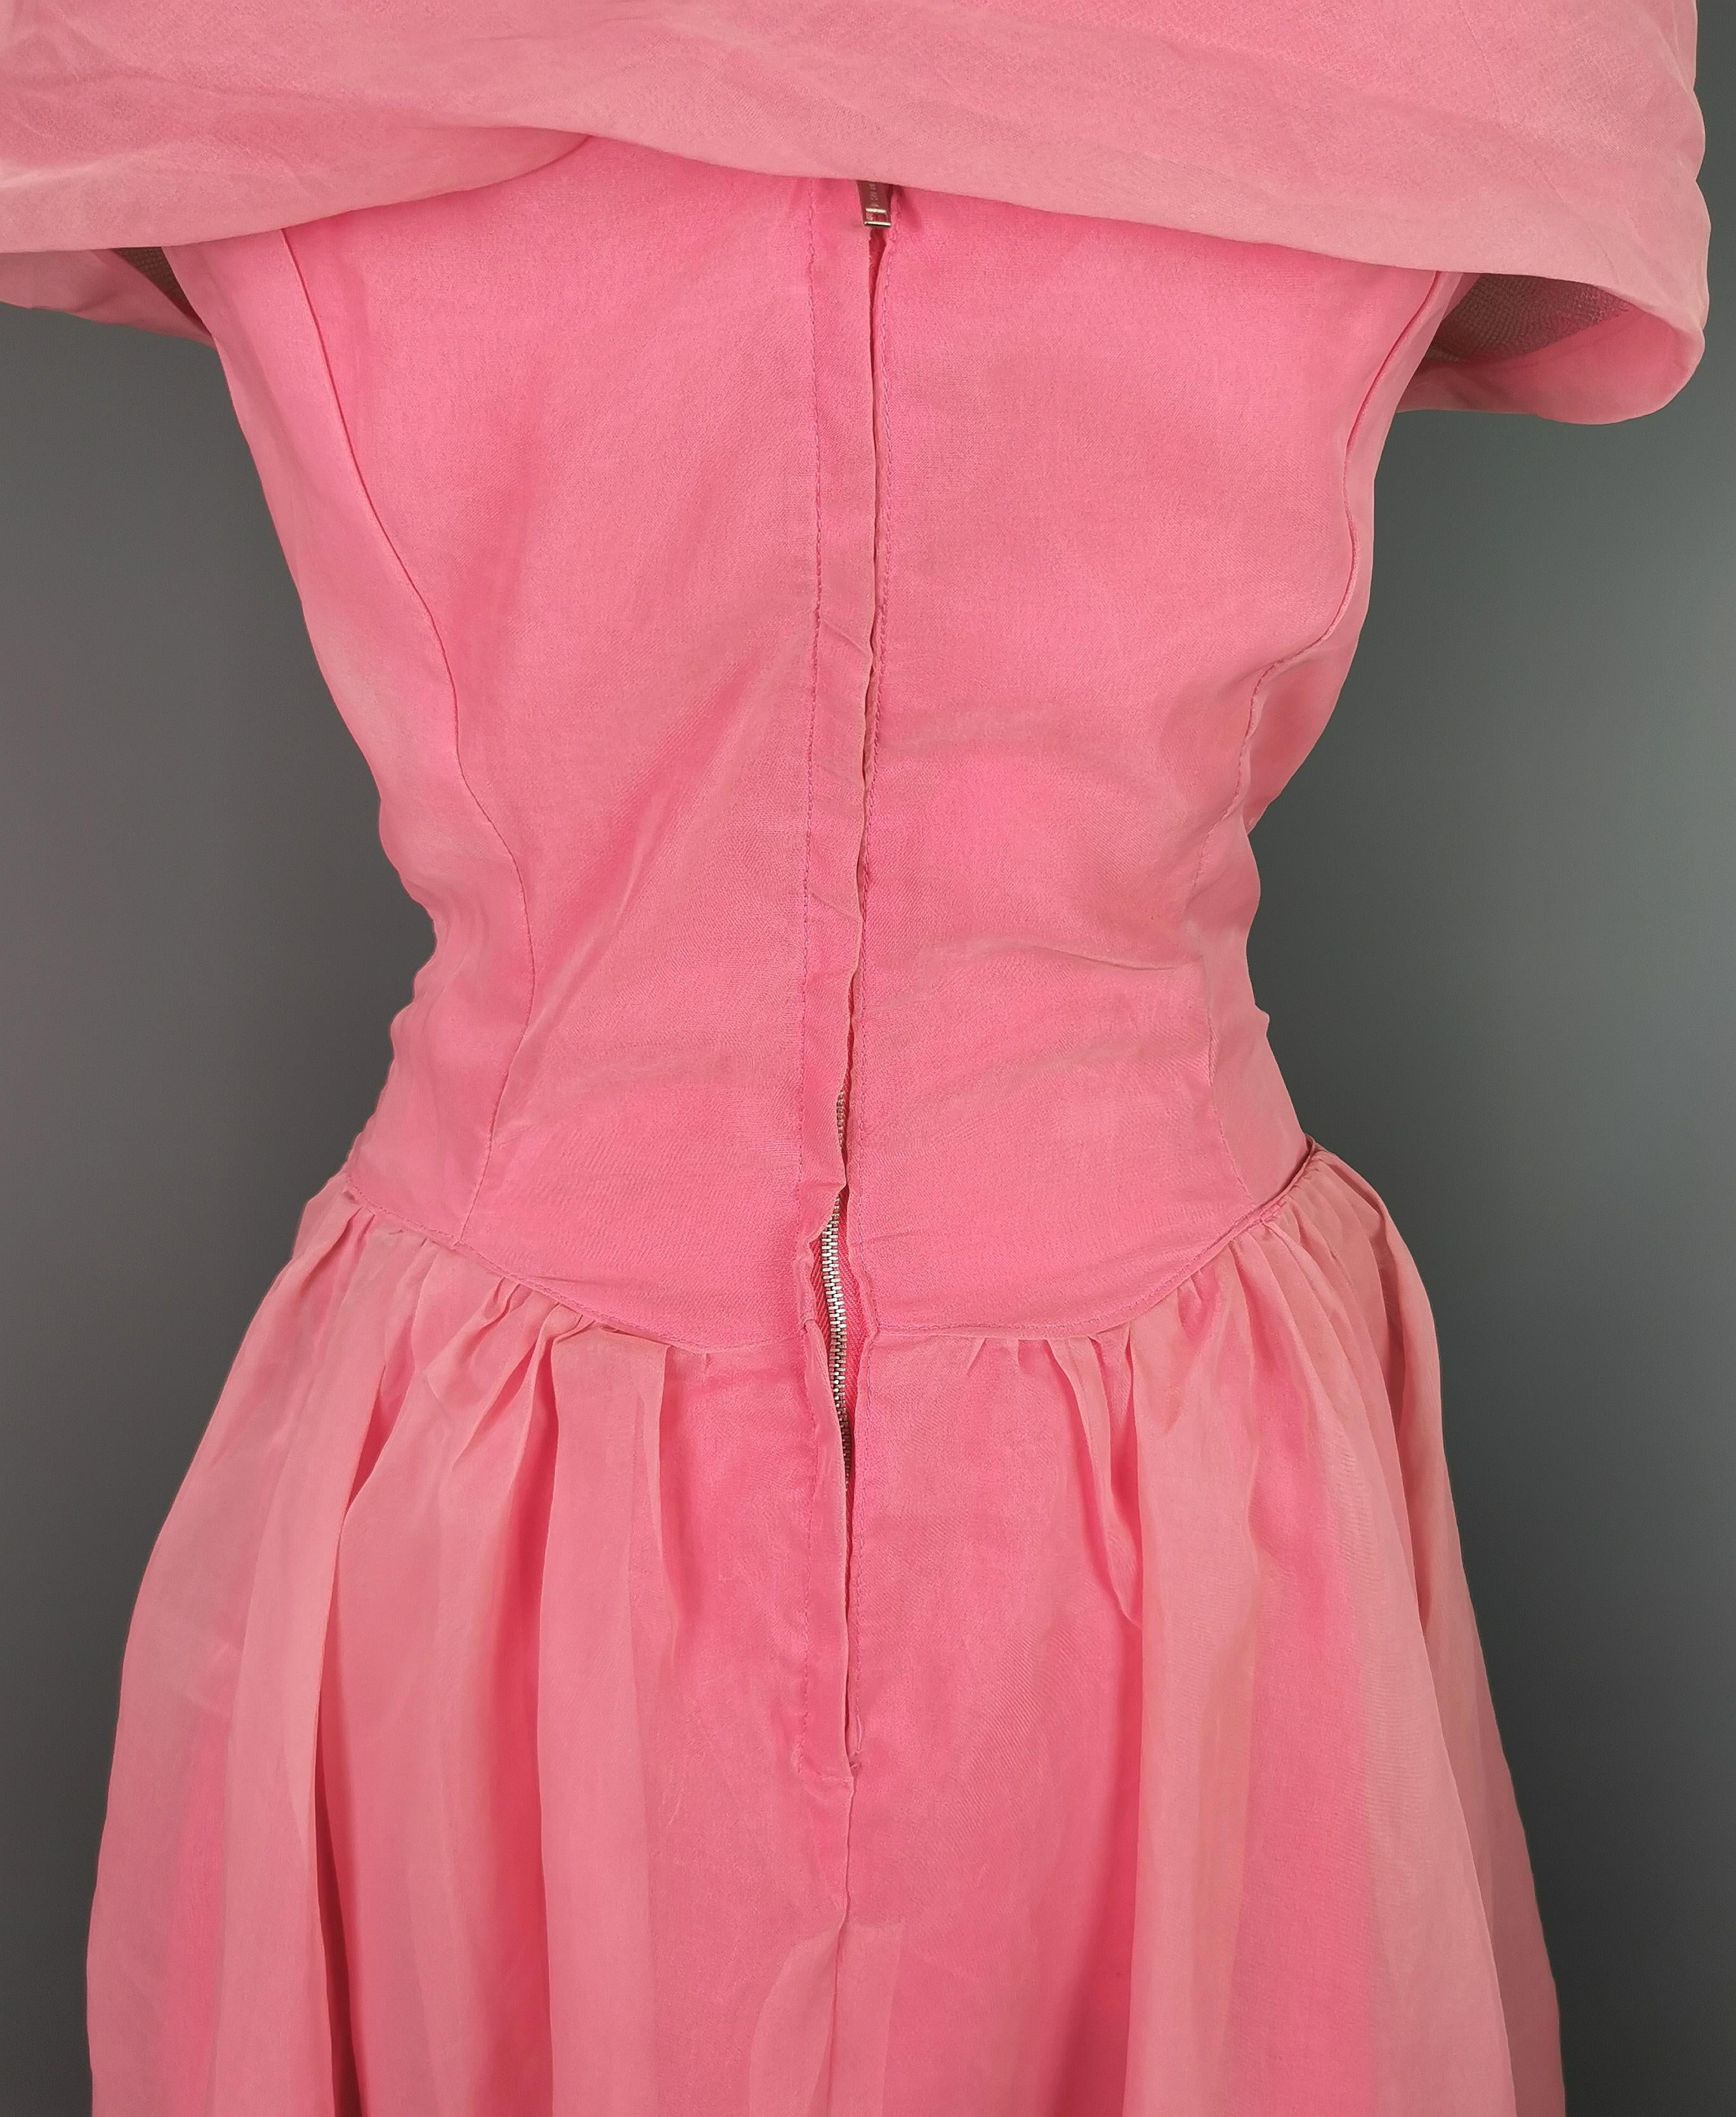 Vintage 1950s pink chiffon organza party dress, prom style  For Sale 4